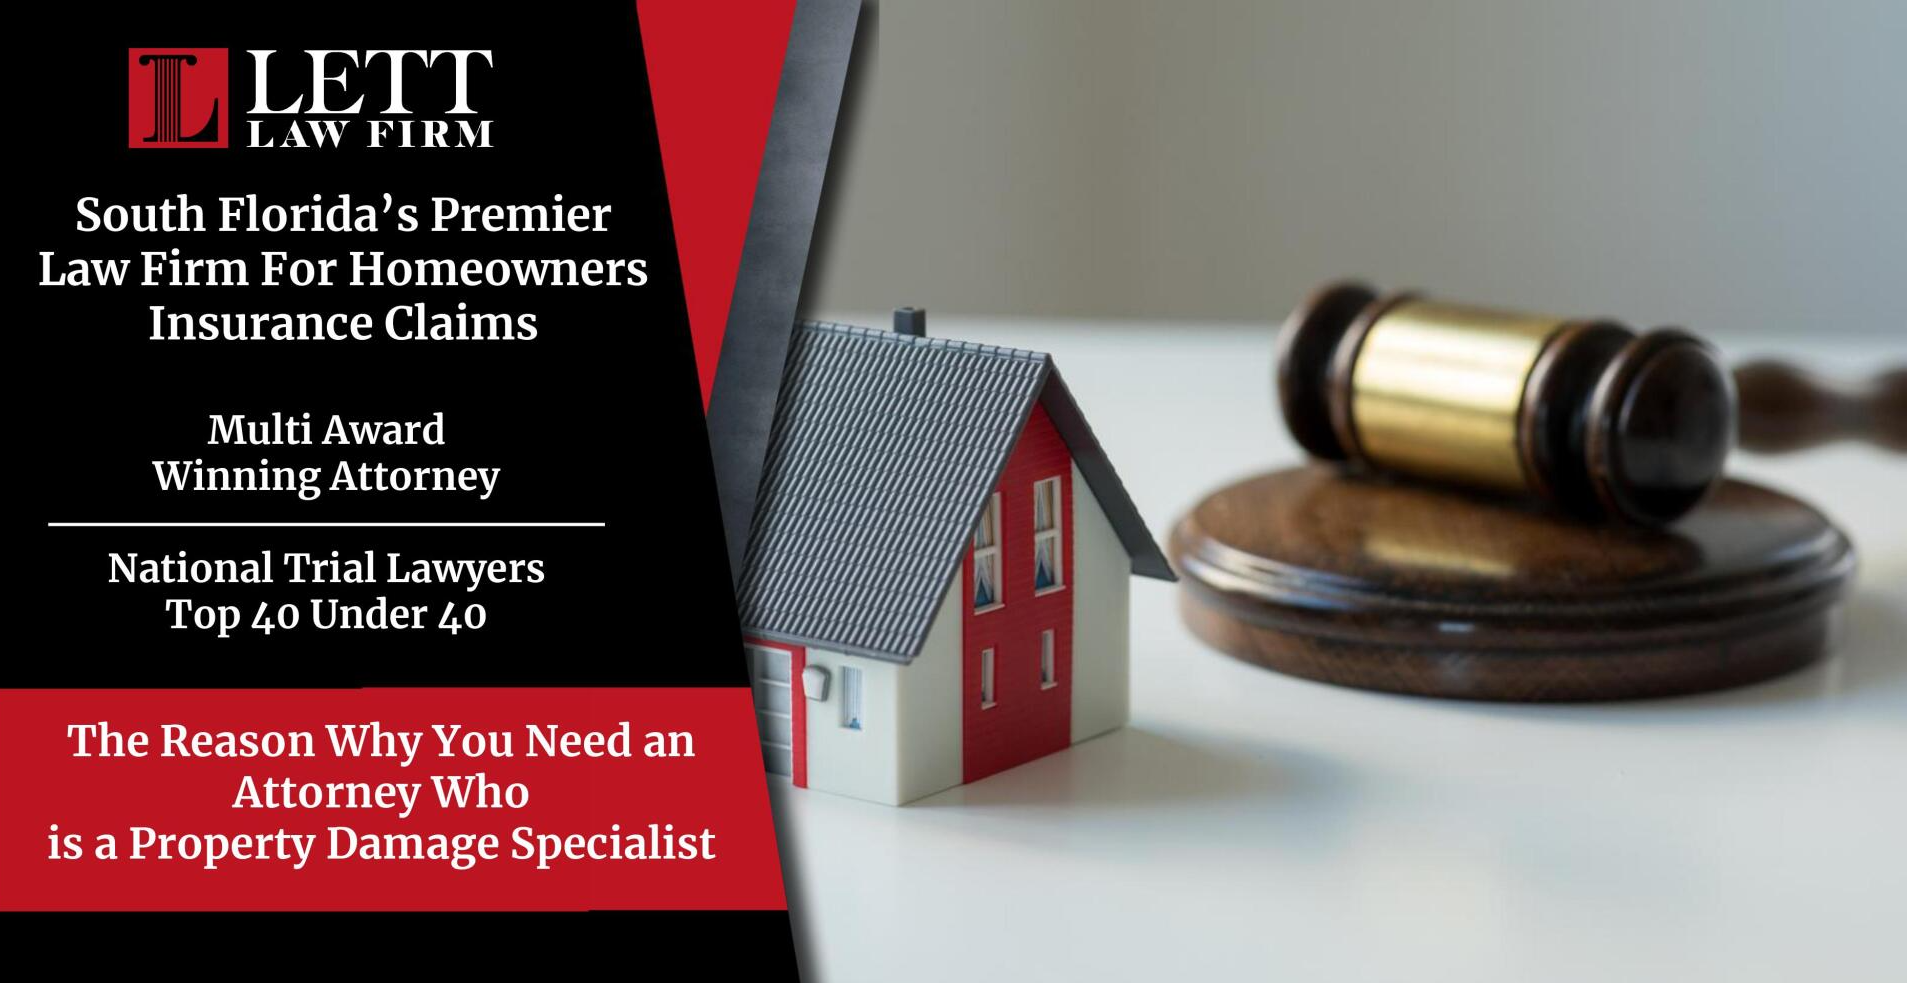 Miami Homeowners Insurance Lawyer - Why You Need A Property Damage Attorney Specialist